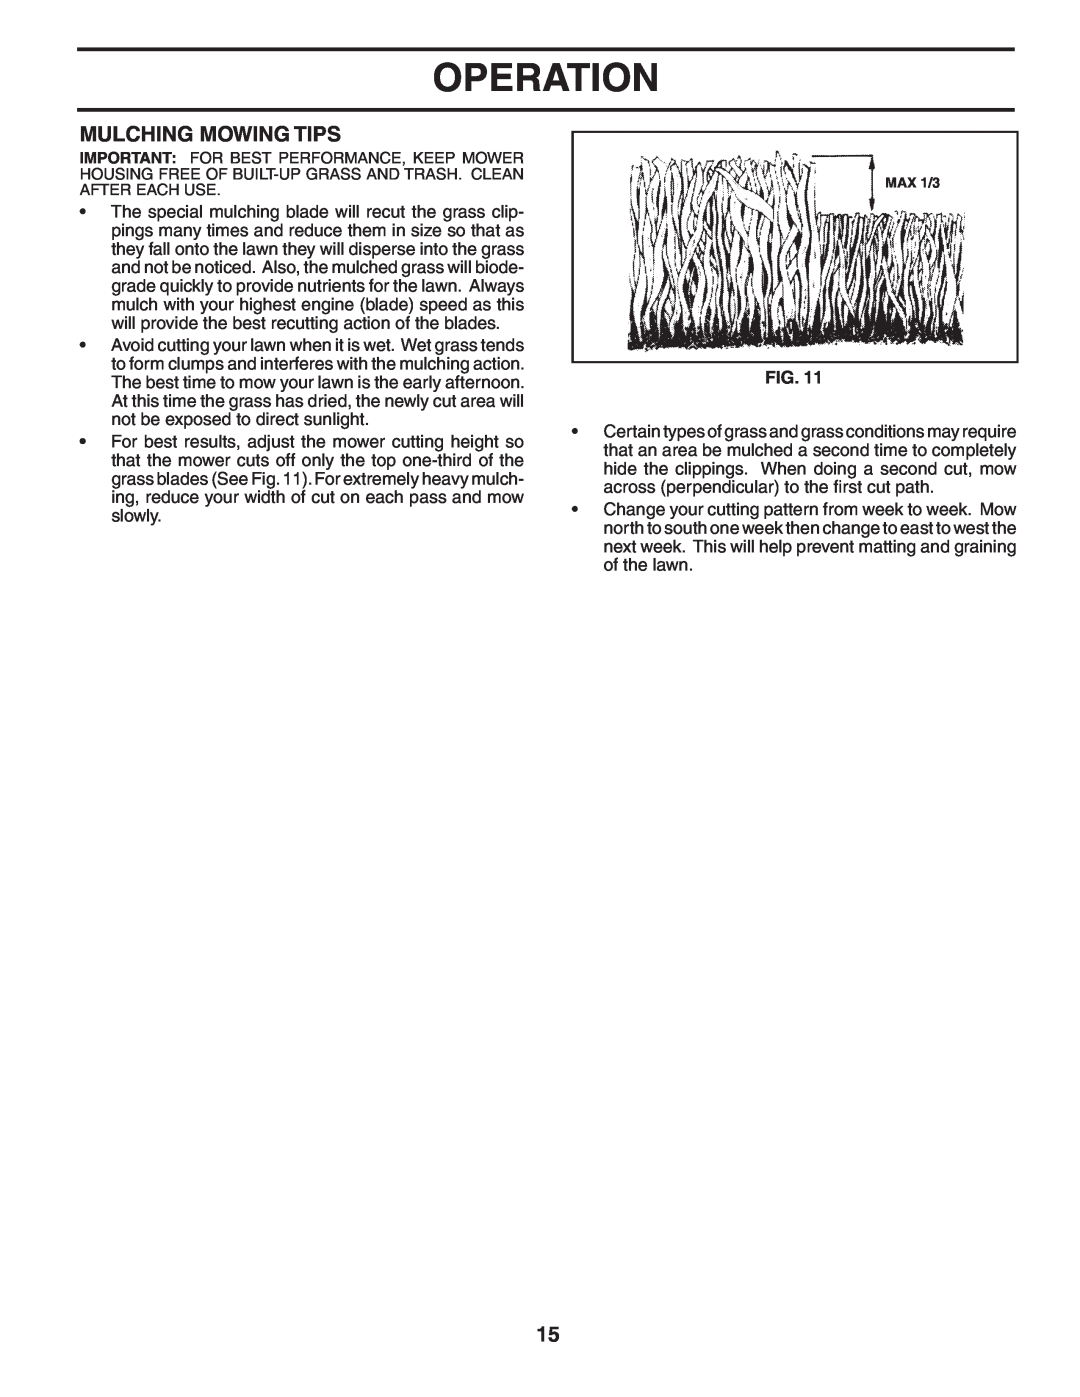 Poulan PD22H42STA owner manual Mulching Mowing Tips, Operation, MAX 1/3 